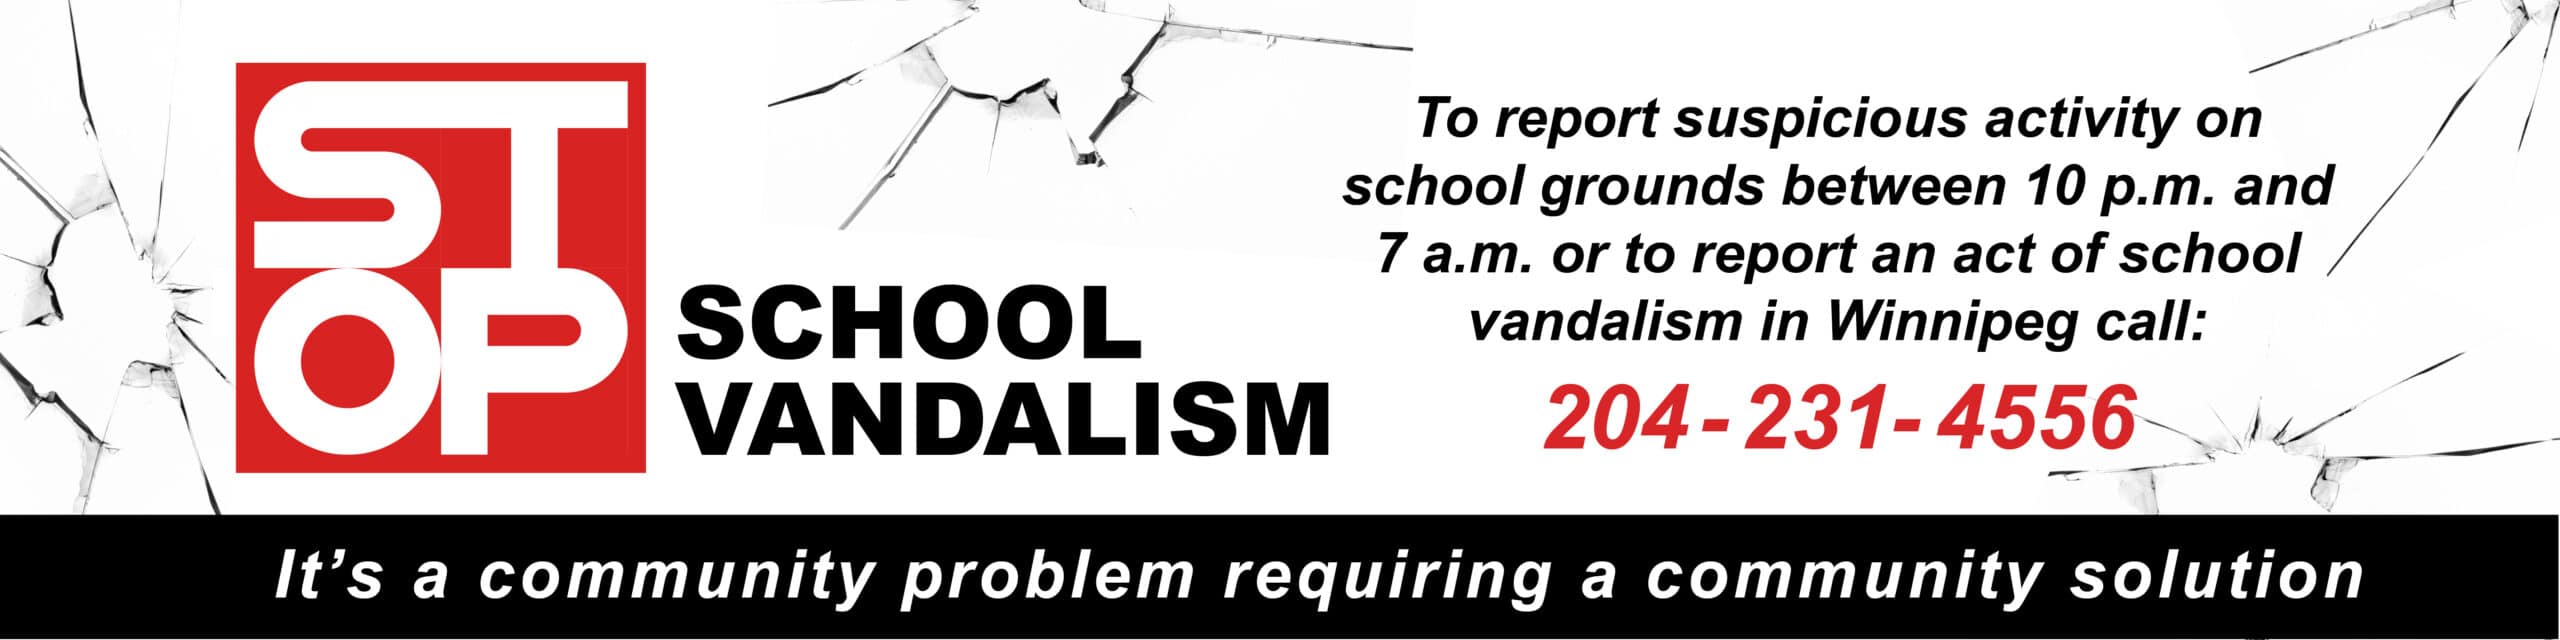 Stop School VandalismTo report suspicious activity on school grounds between 10 p.m. and 7 a.m. or to report an act of school  vandalism in Winnipeg call:  204 - 231- 4556. It’s a community problem requiring a community solution .